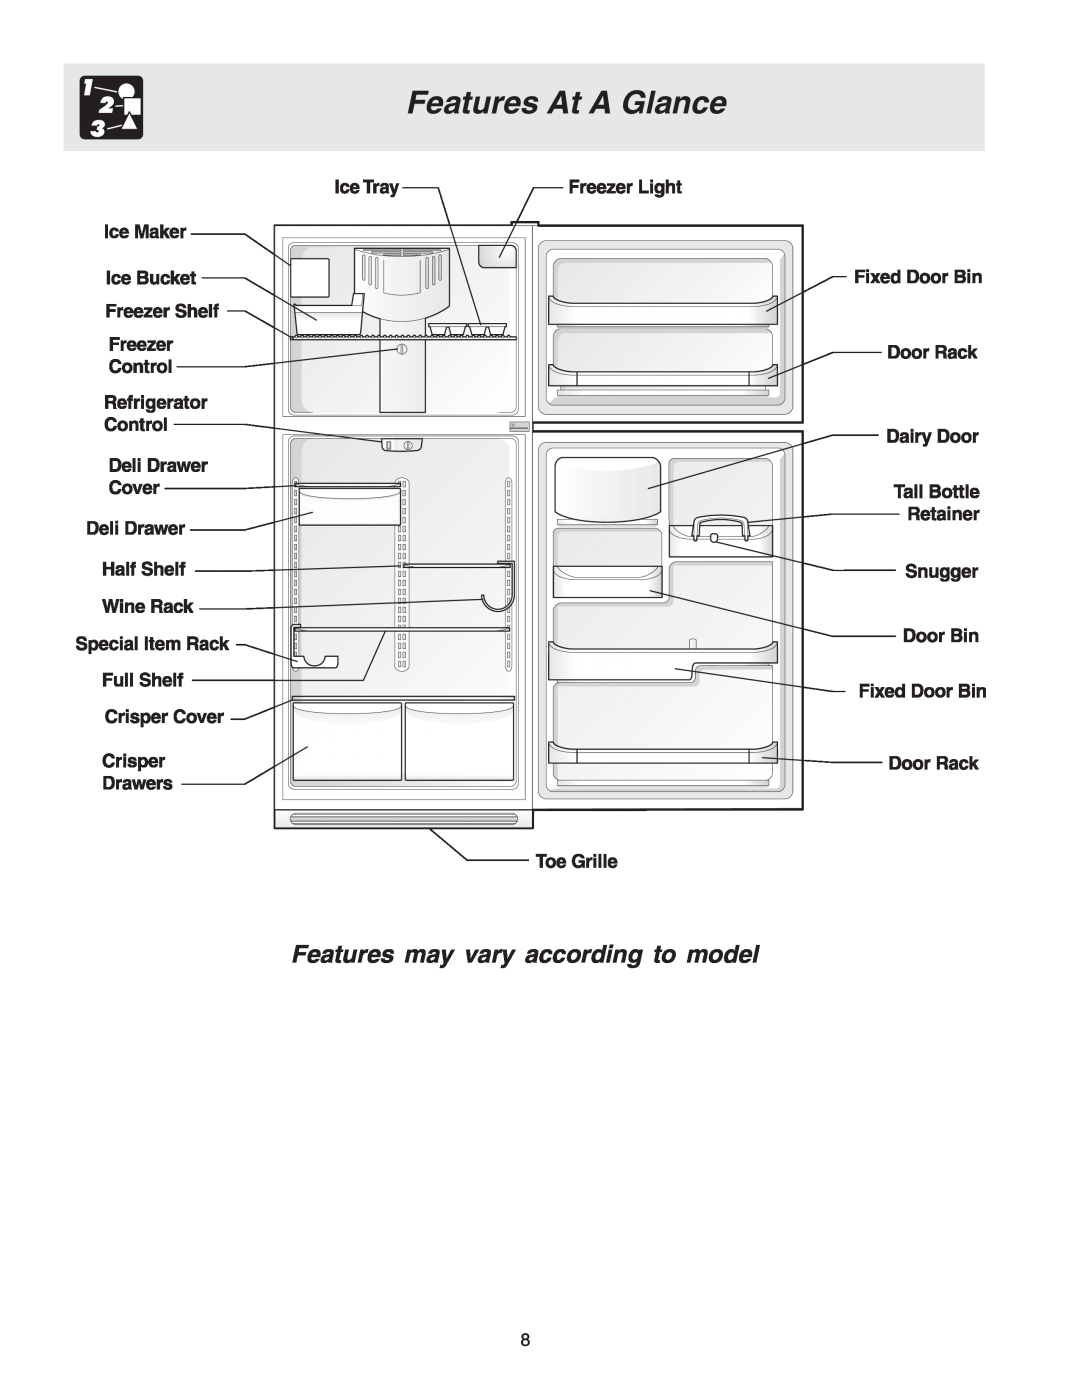 Electrolux - Gibson 240435505 manual Features At A Glance, Features may vary according to model 